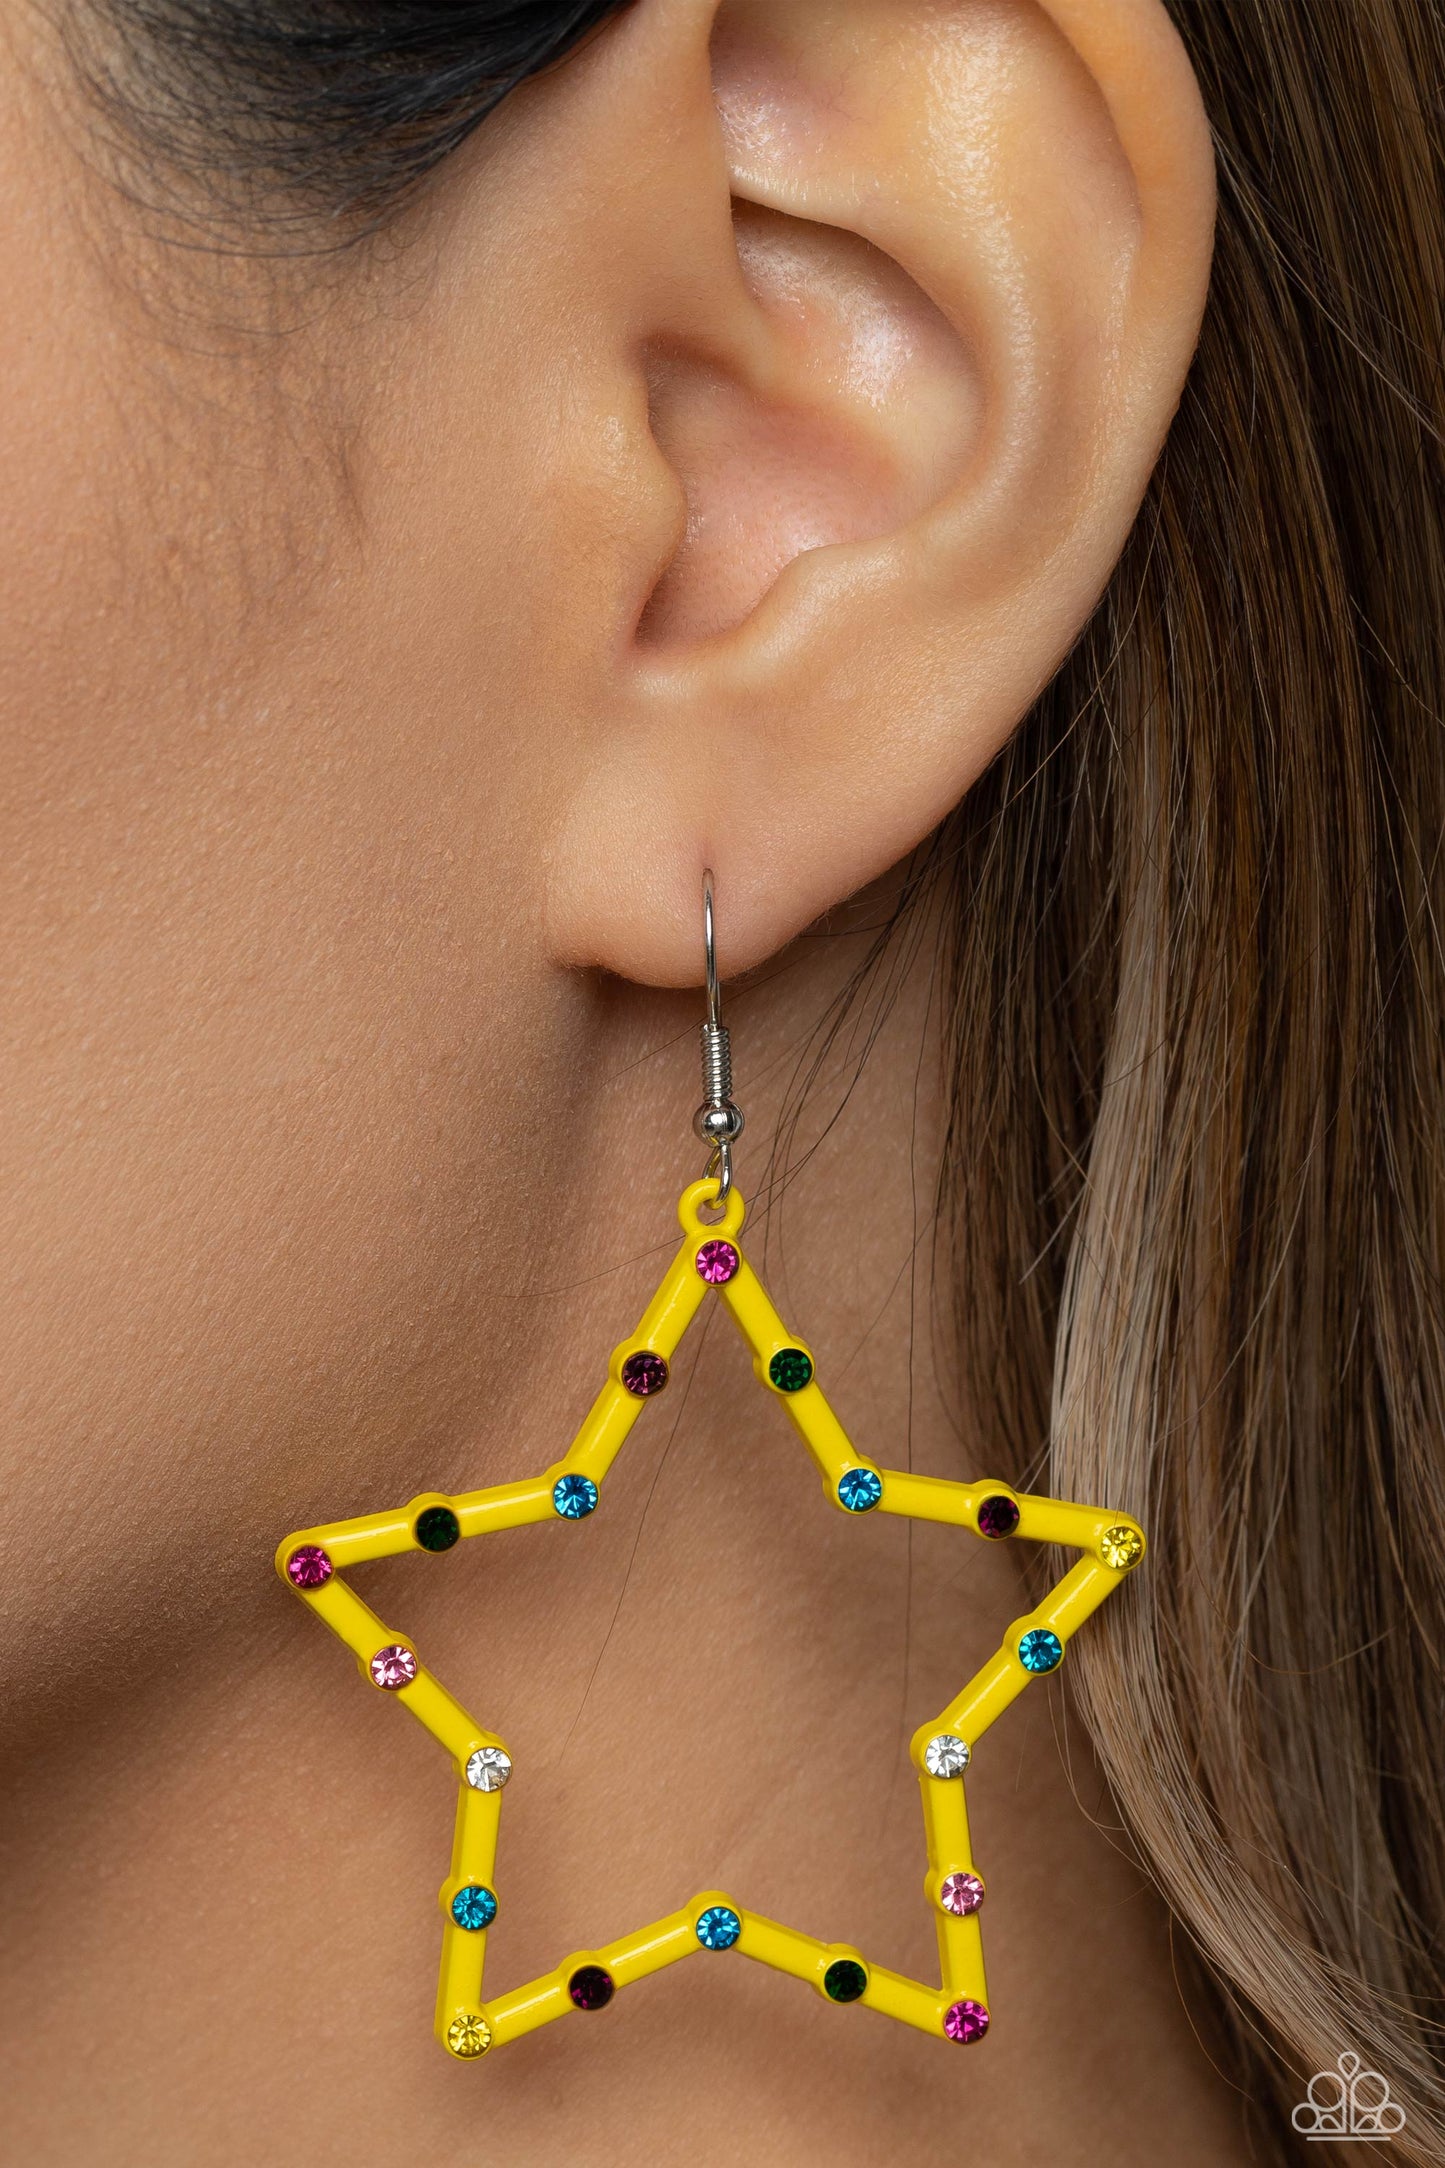 Yellow star frames, dotted with dainty colorful rhinestones, reflects light off its colored surface for a fashion-forward statement. Earring attaches to a standard fishhook fitting.